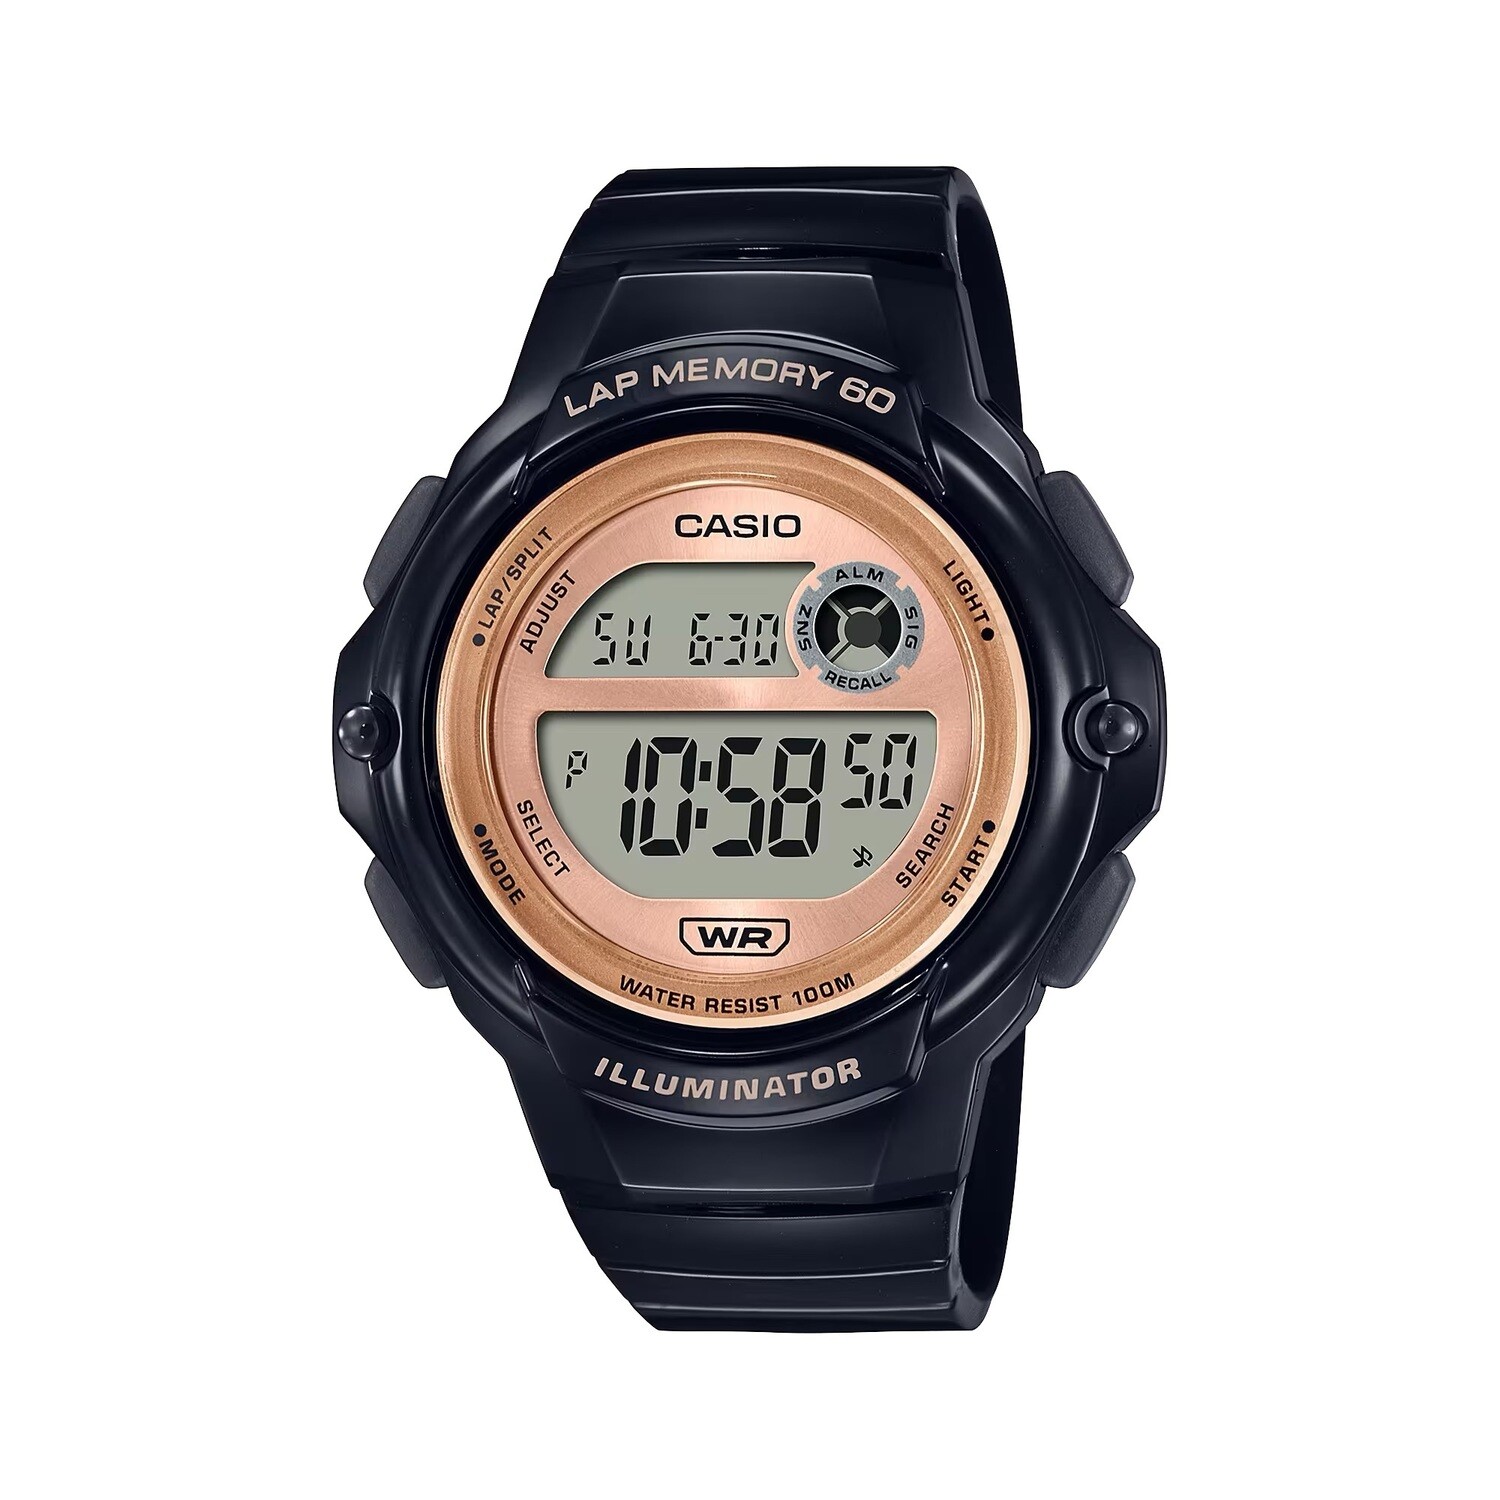 Casio LWS-1200H-1A Lap Memory Running Watch LWS-1200H-1A